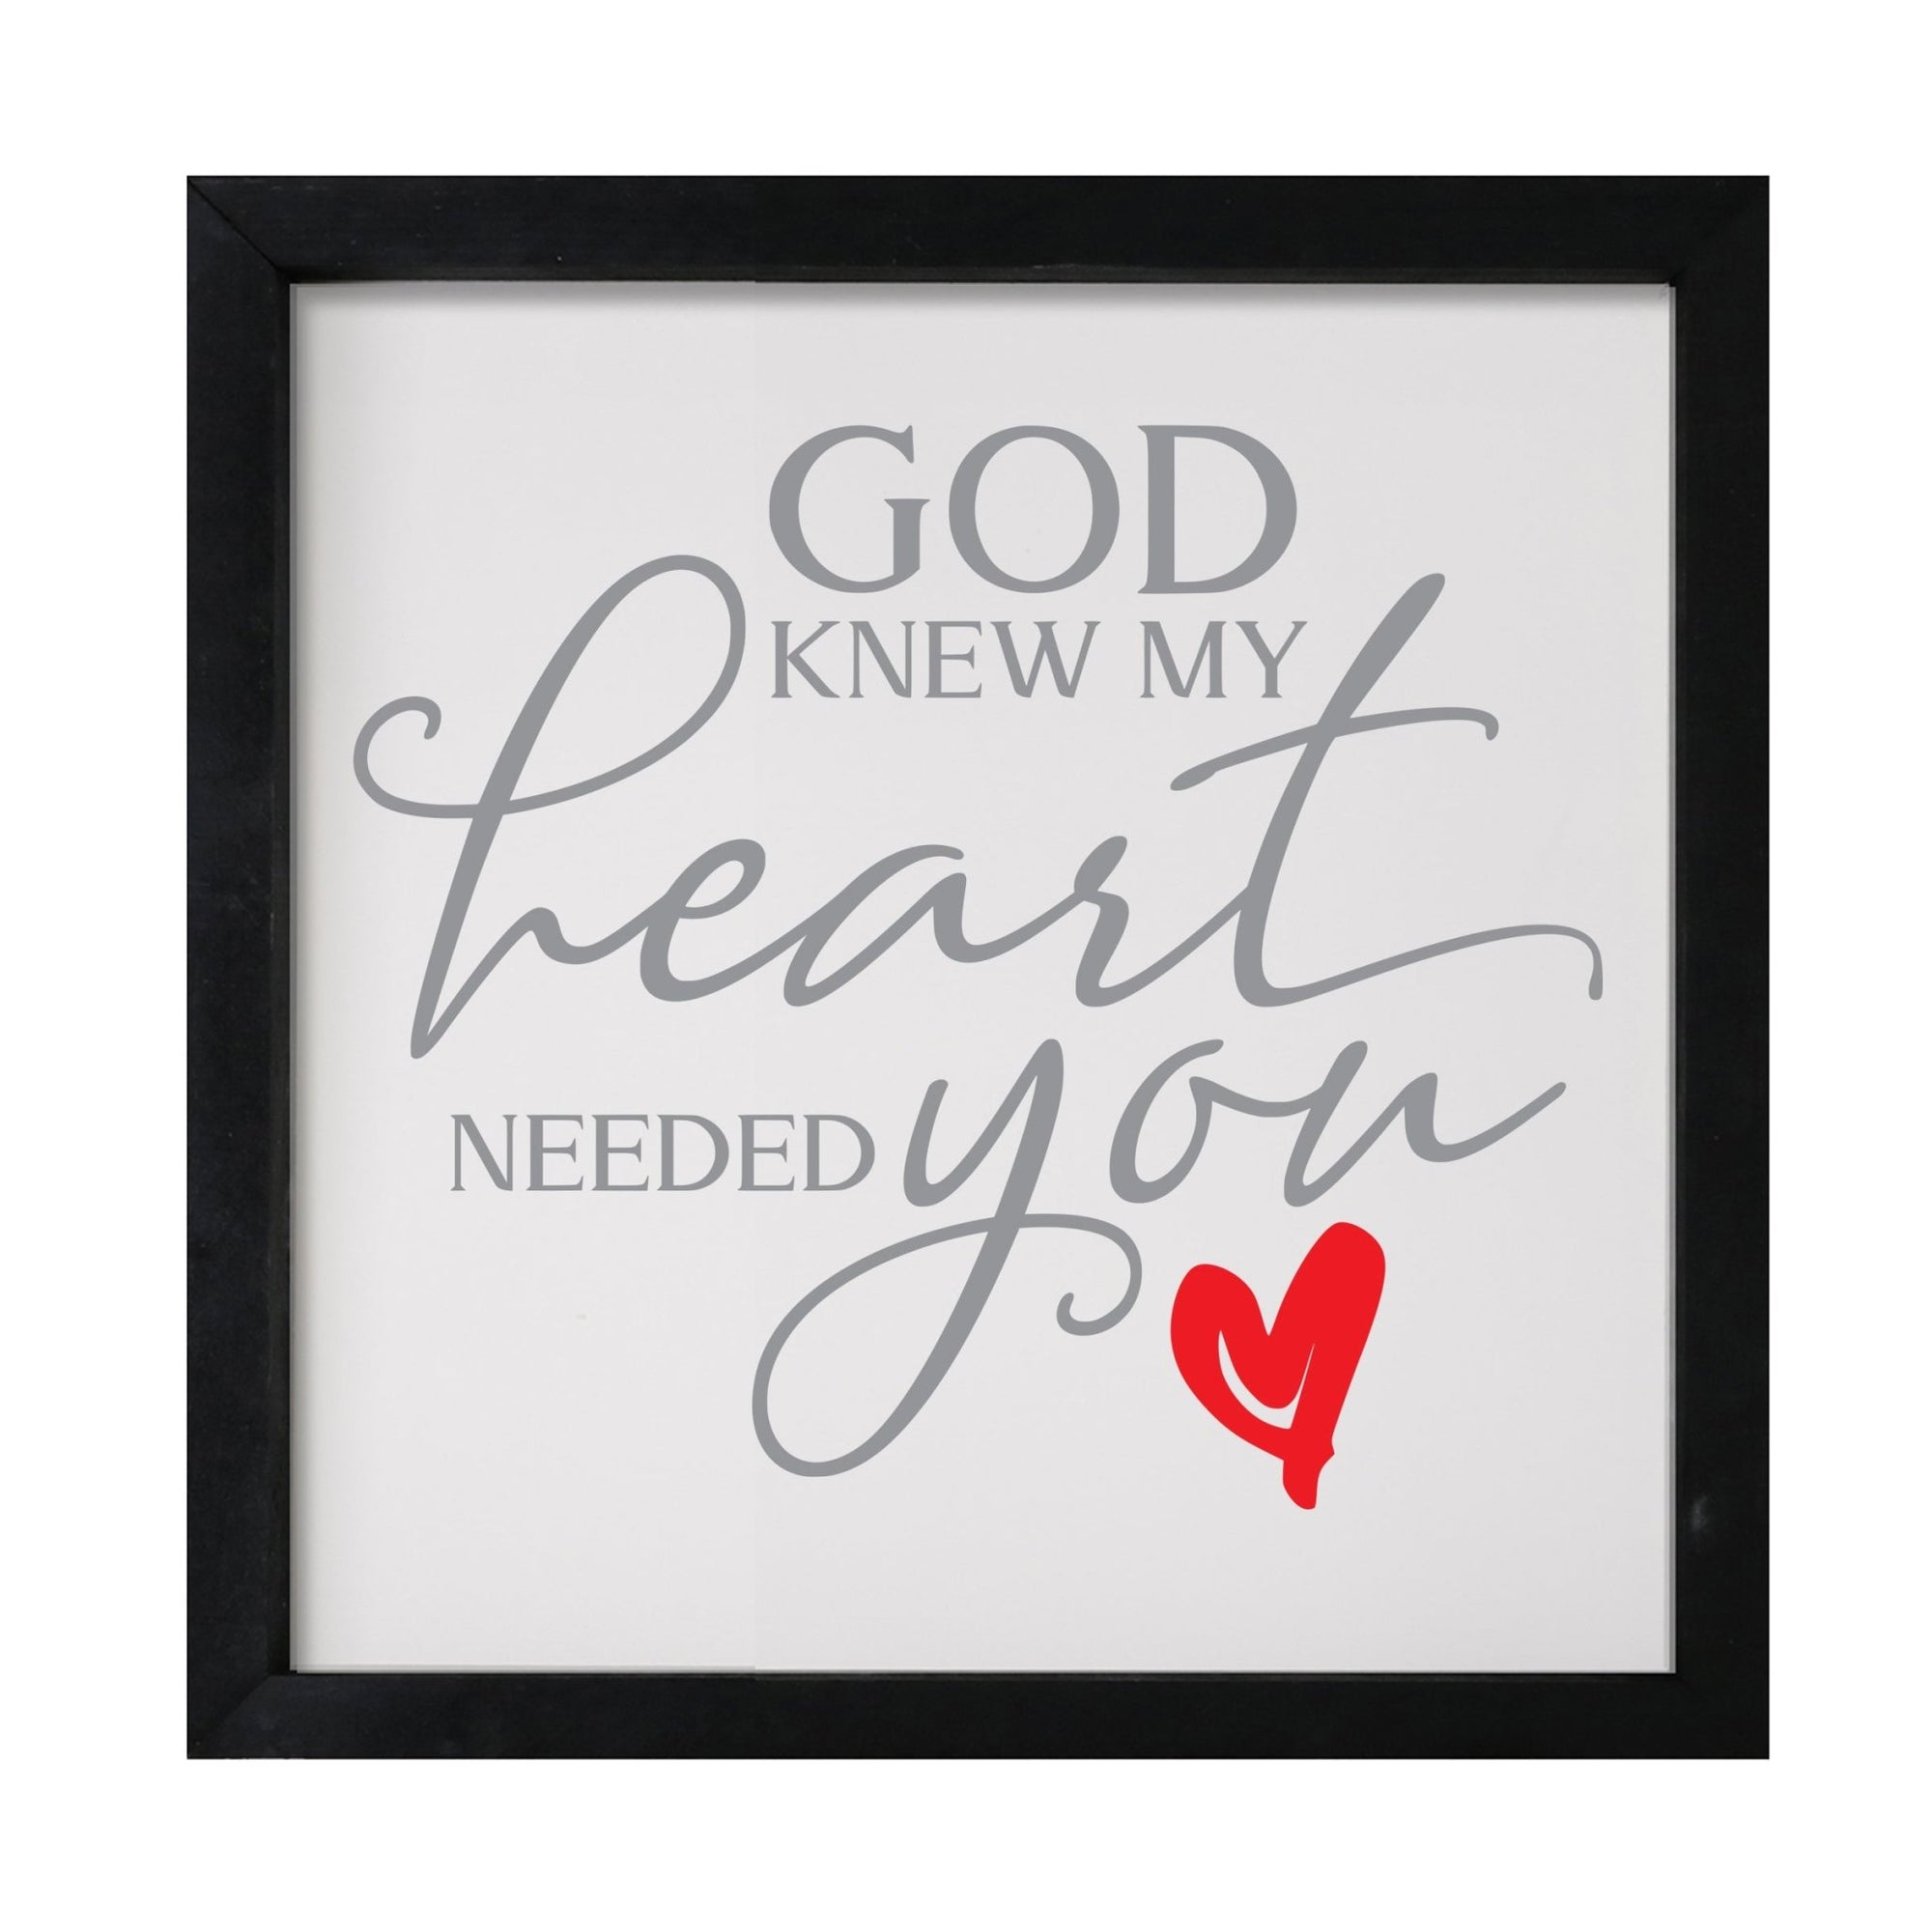 Inspiring Modern Framed Shadow Box 7x7in - God Knew My Heart Needed You (Heart) - LifeSong Milestones